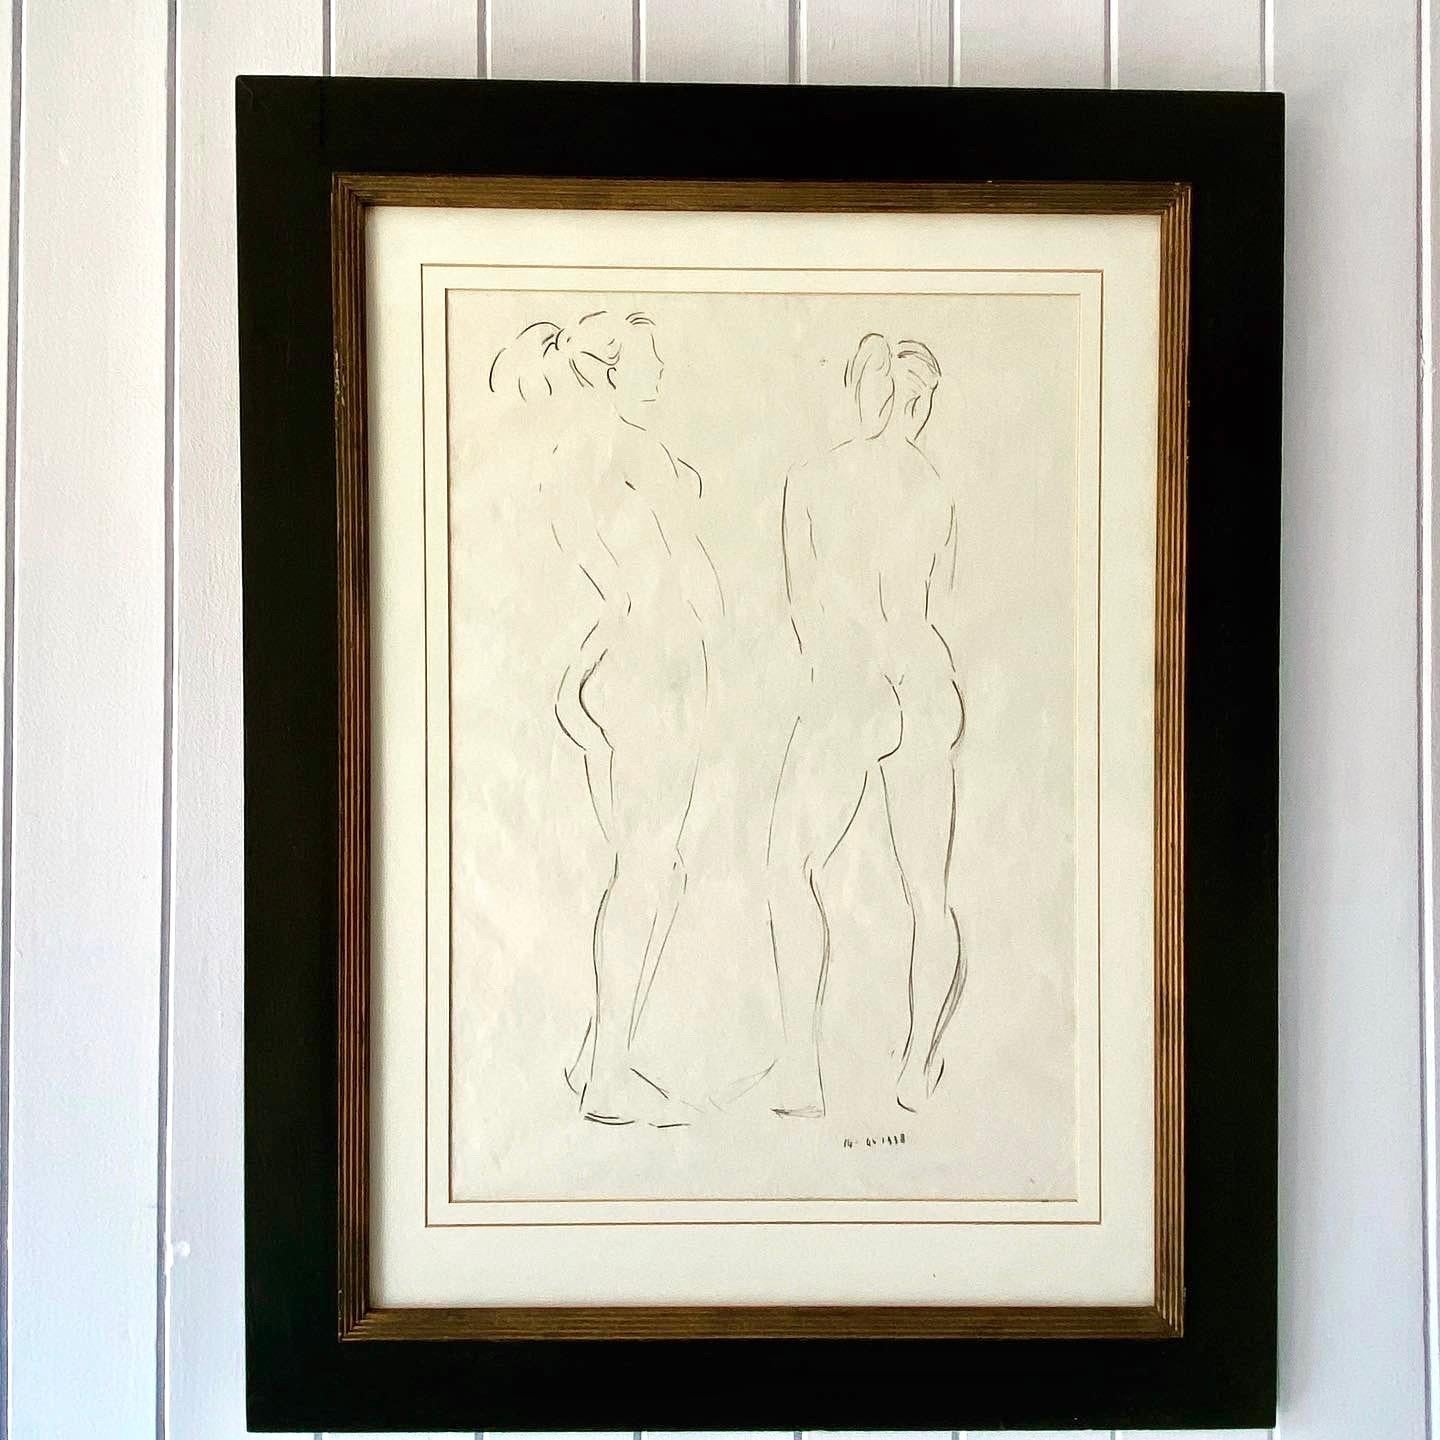 A delightful pair of nicely executed midcentury nude studies. Nicely mounted and framed in a black and gilt reeded frame. They have had museum glass fitted to cut down the reflection. Dated 1958. Highly decorative and would suit a modern or period